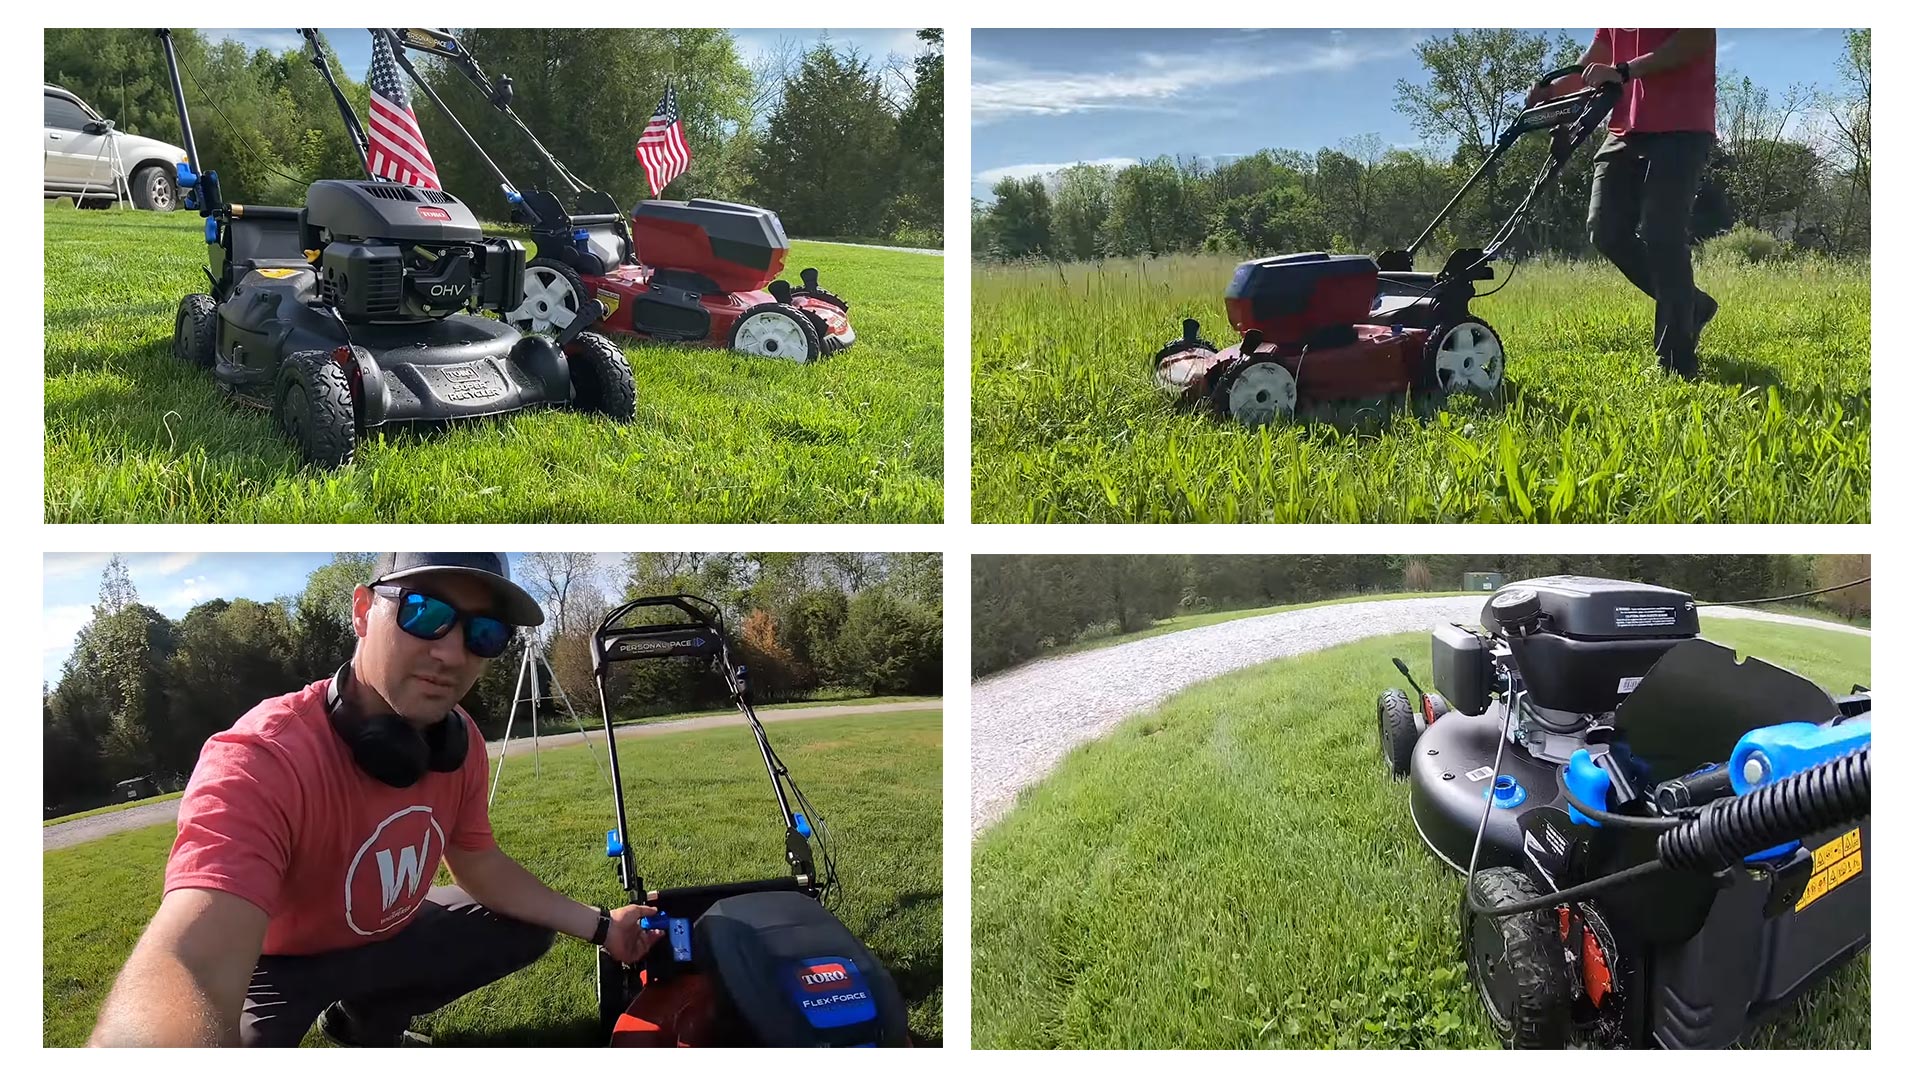 Images of guy mowing